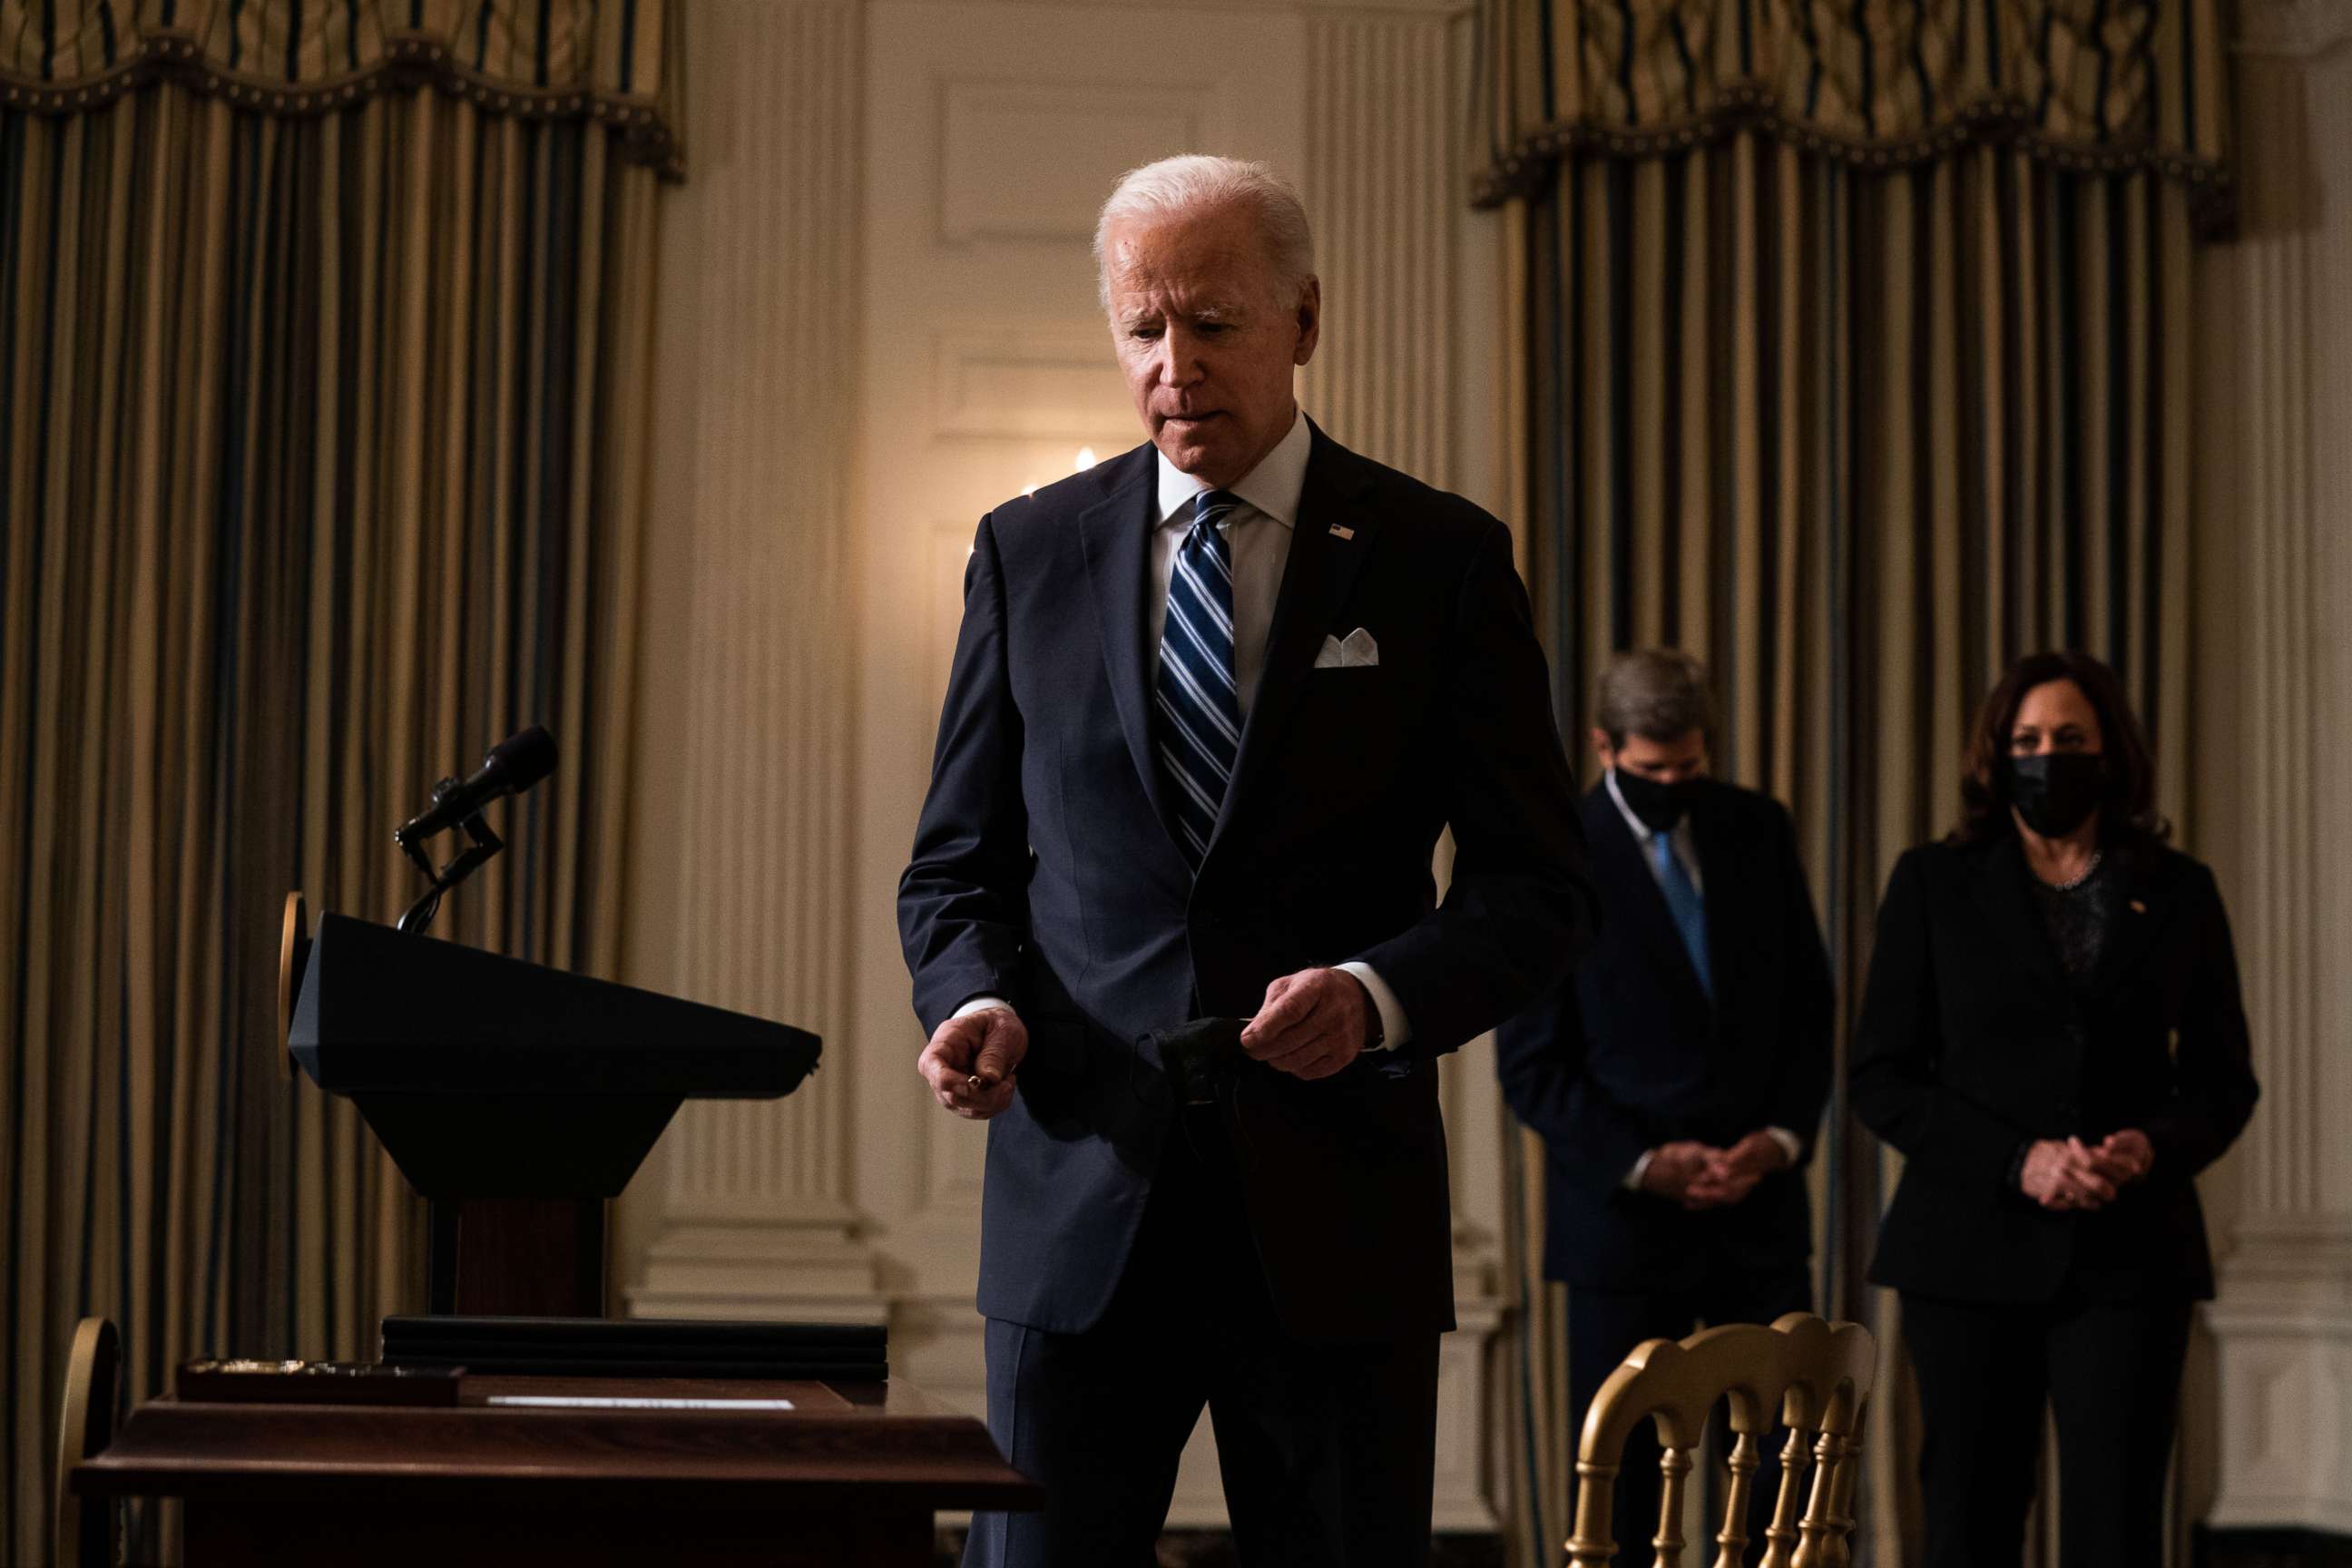 PHOTO: President Joe Biden prepares to sign executive orders after speaking about climate change issues in the State Dining Room of the White House on Jan. 27, 2021, in Washington, D.C.